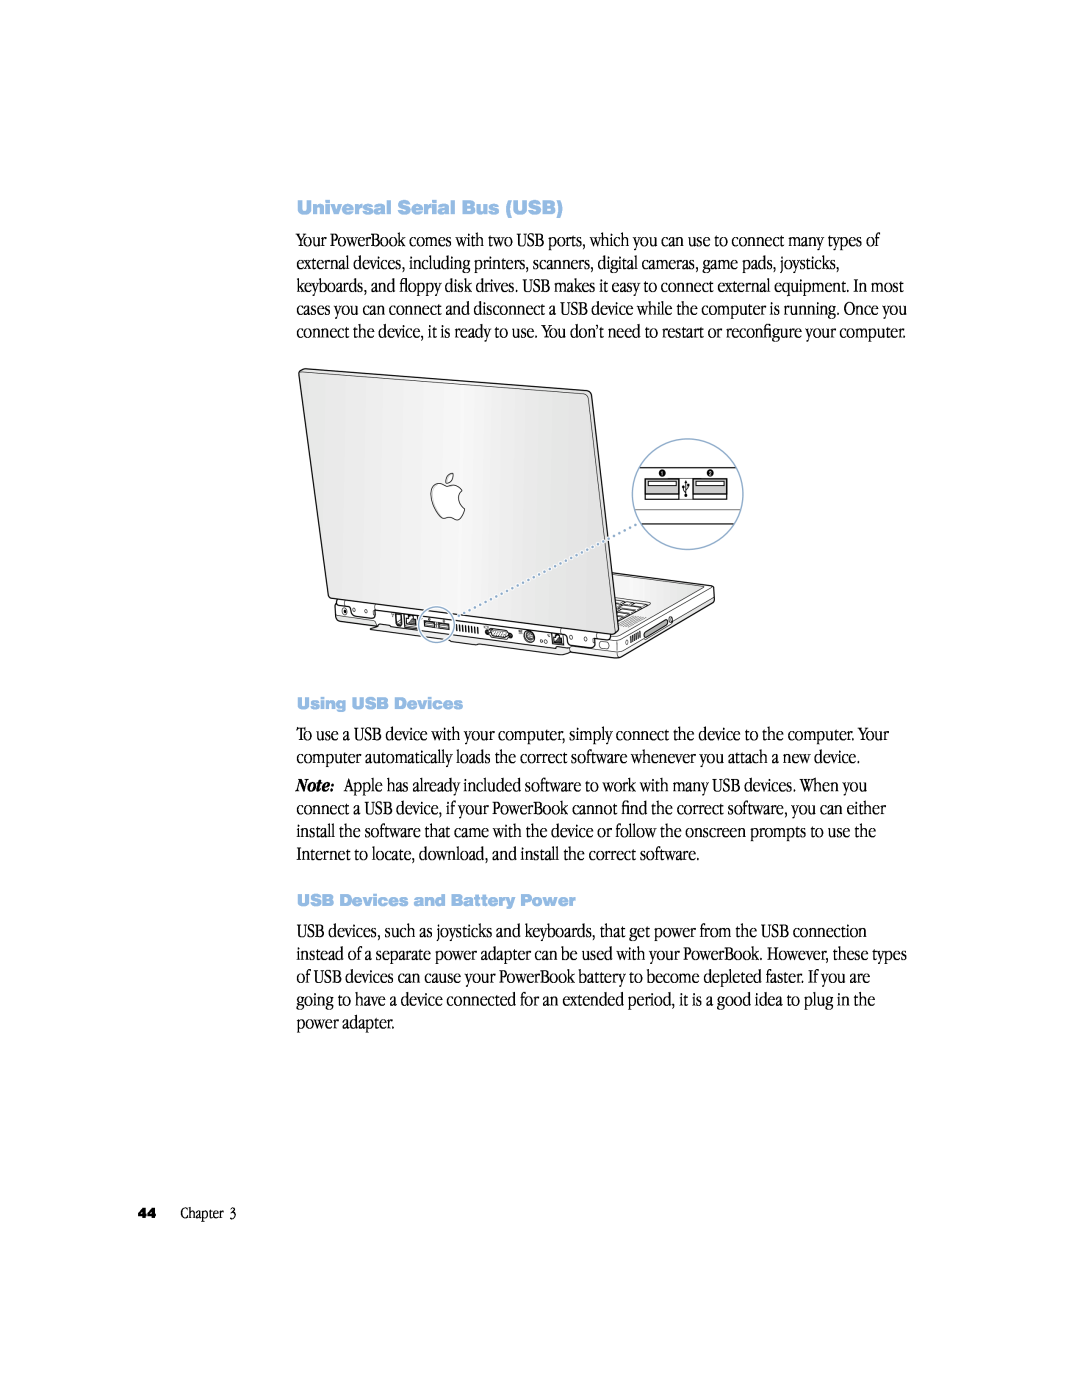 Apple powerbook g4 manual Universal Serial Bus USB, Using USB Devices, USB Devices and Battery Power, Chapter 